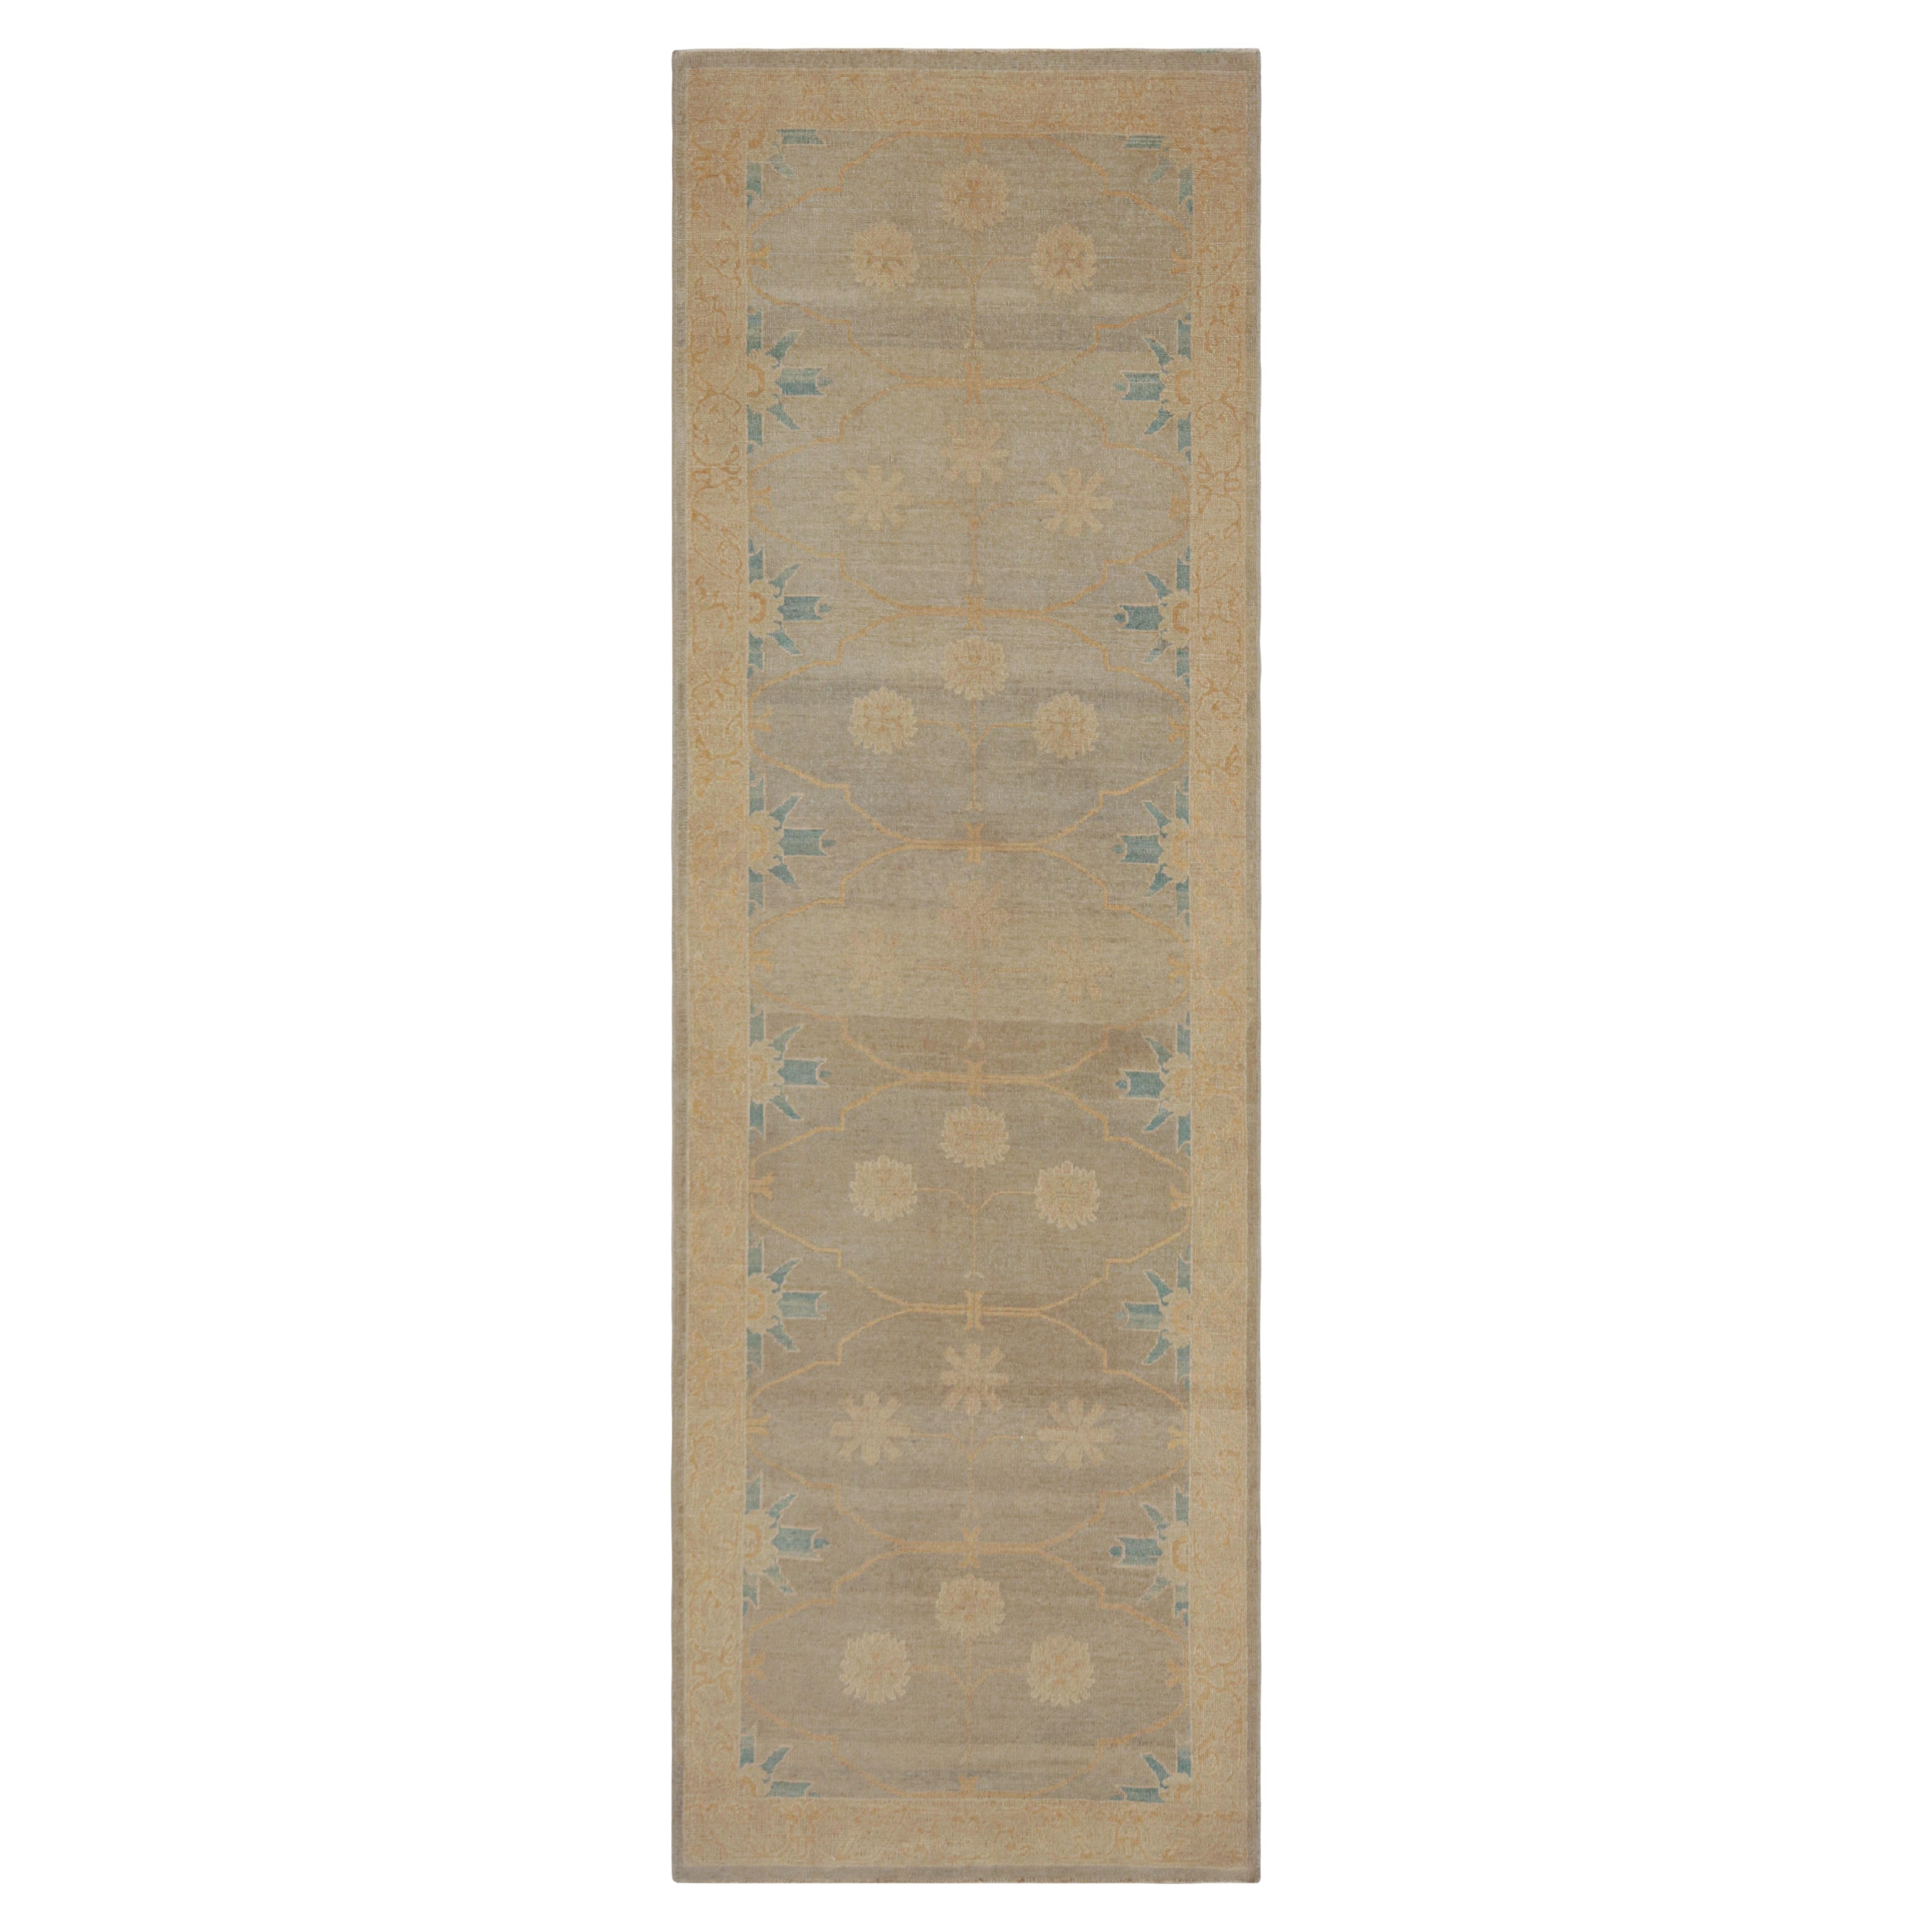 Rug & Kilim’s Khotan Style Runner in Gray Beige and Blue Floral Pattern